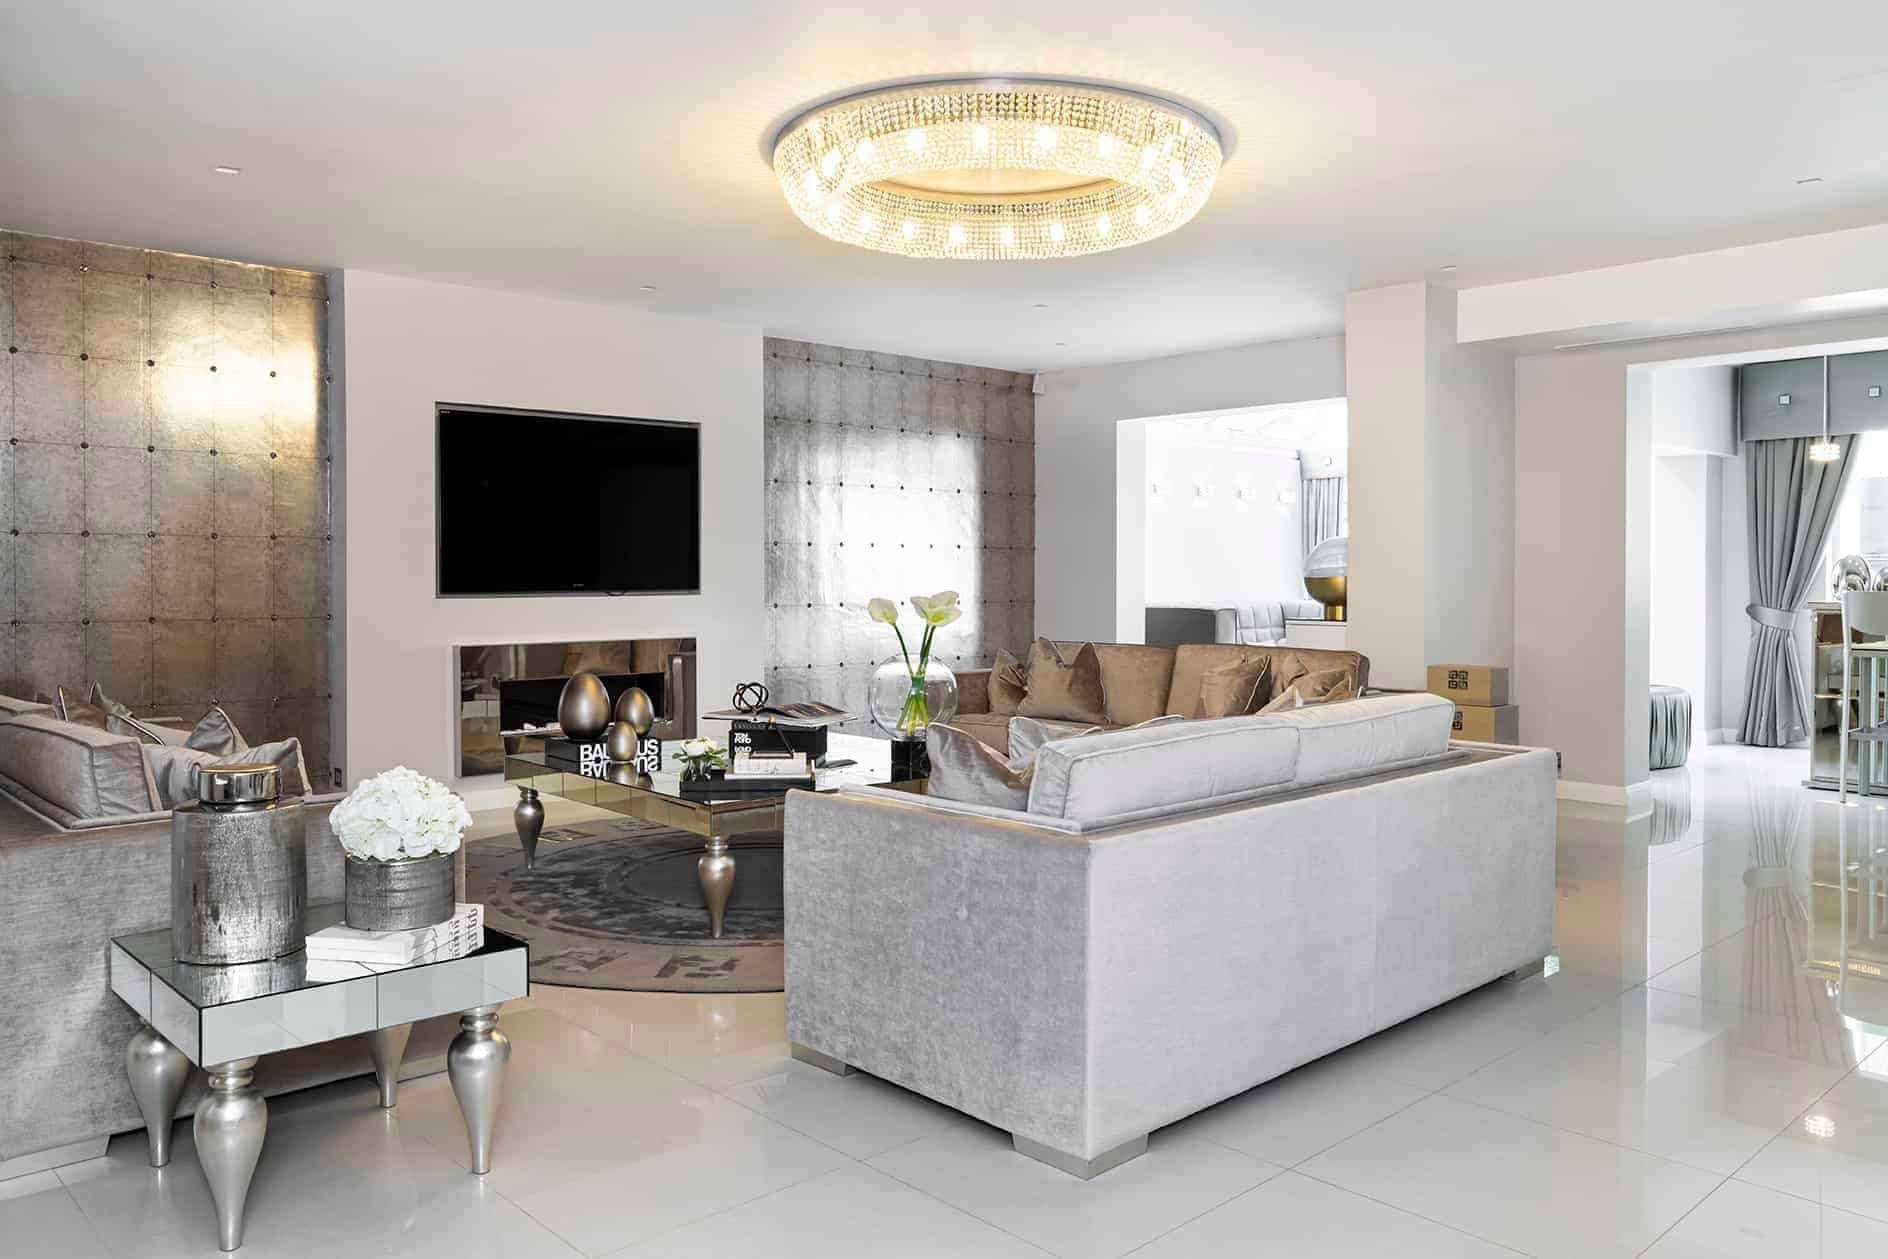 Formal lounge in an interior design project in Chatsworth Road